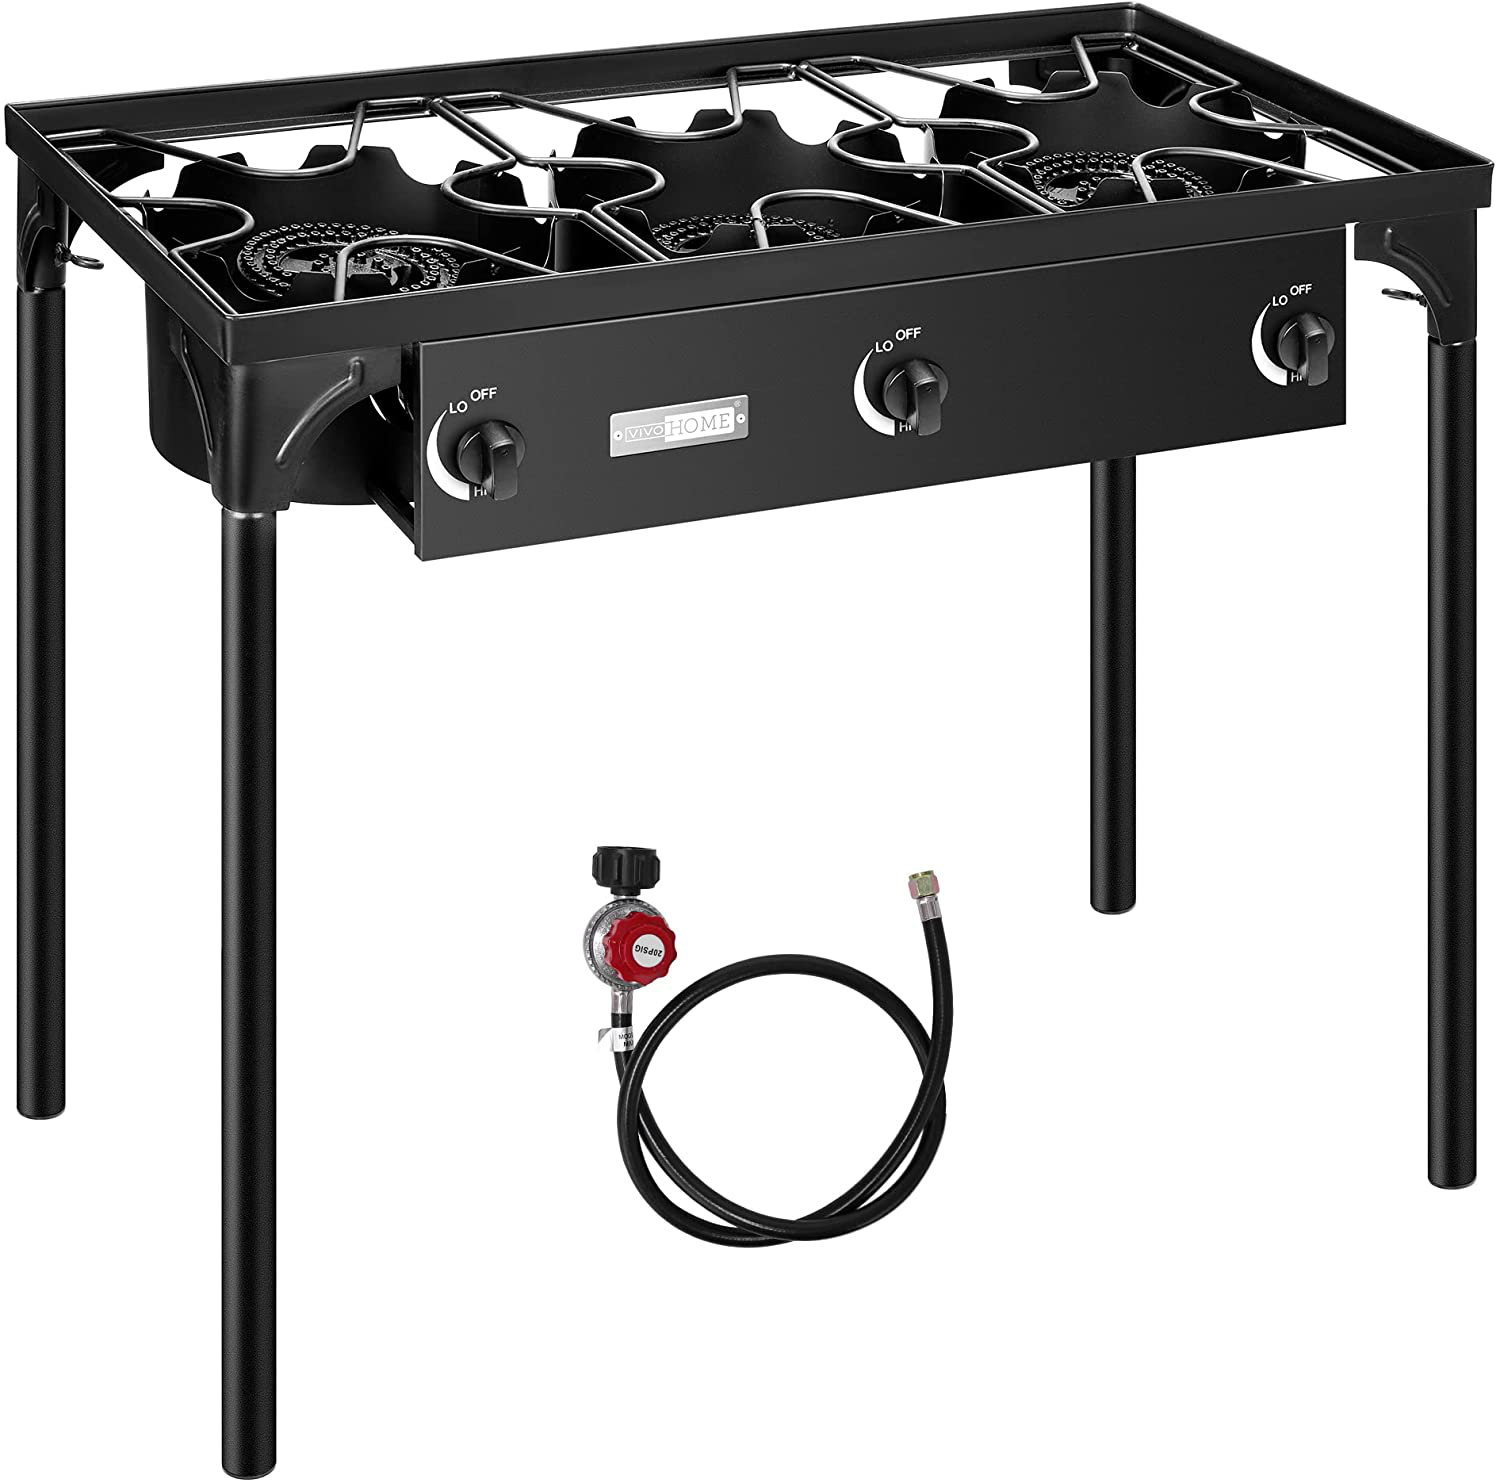 Portable Camping Stove Burner Cast Iron Propane Gas LPG Outdoor BBQ Cooker  Stand